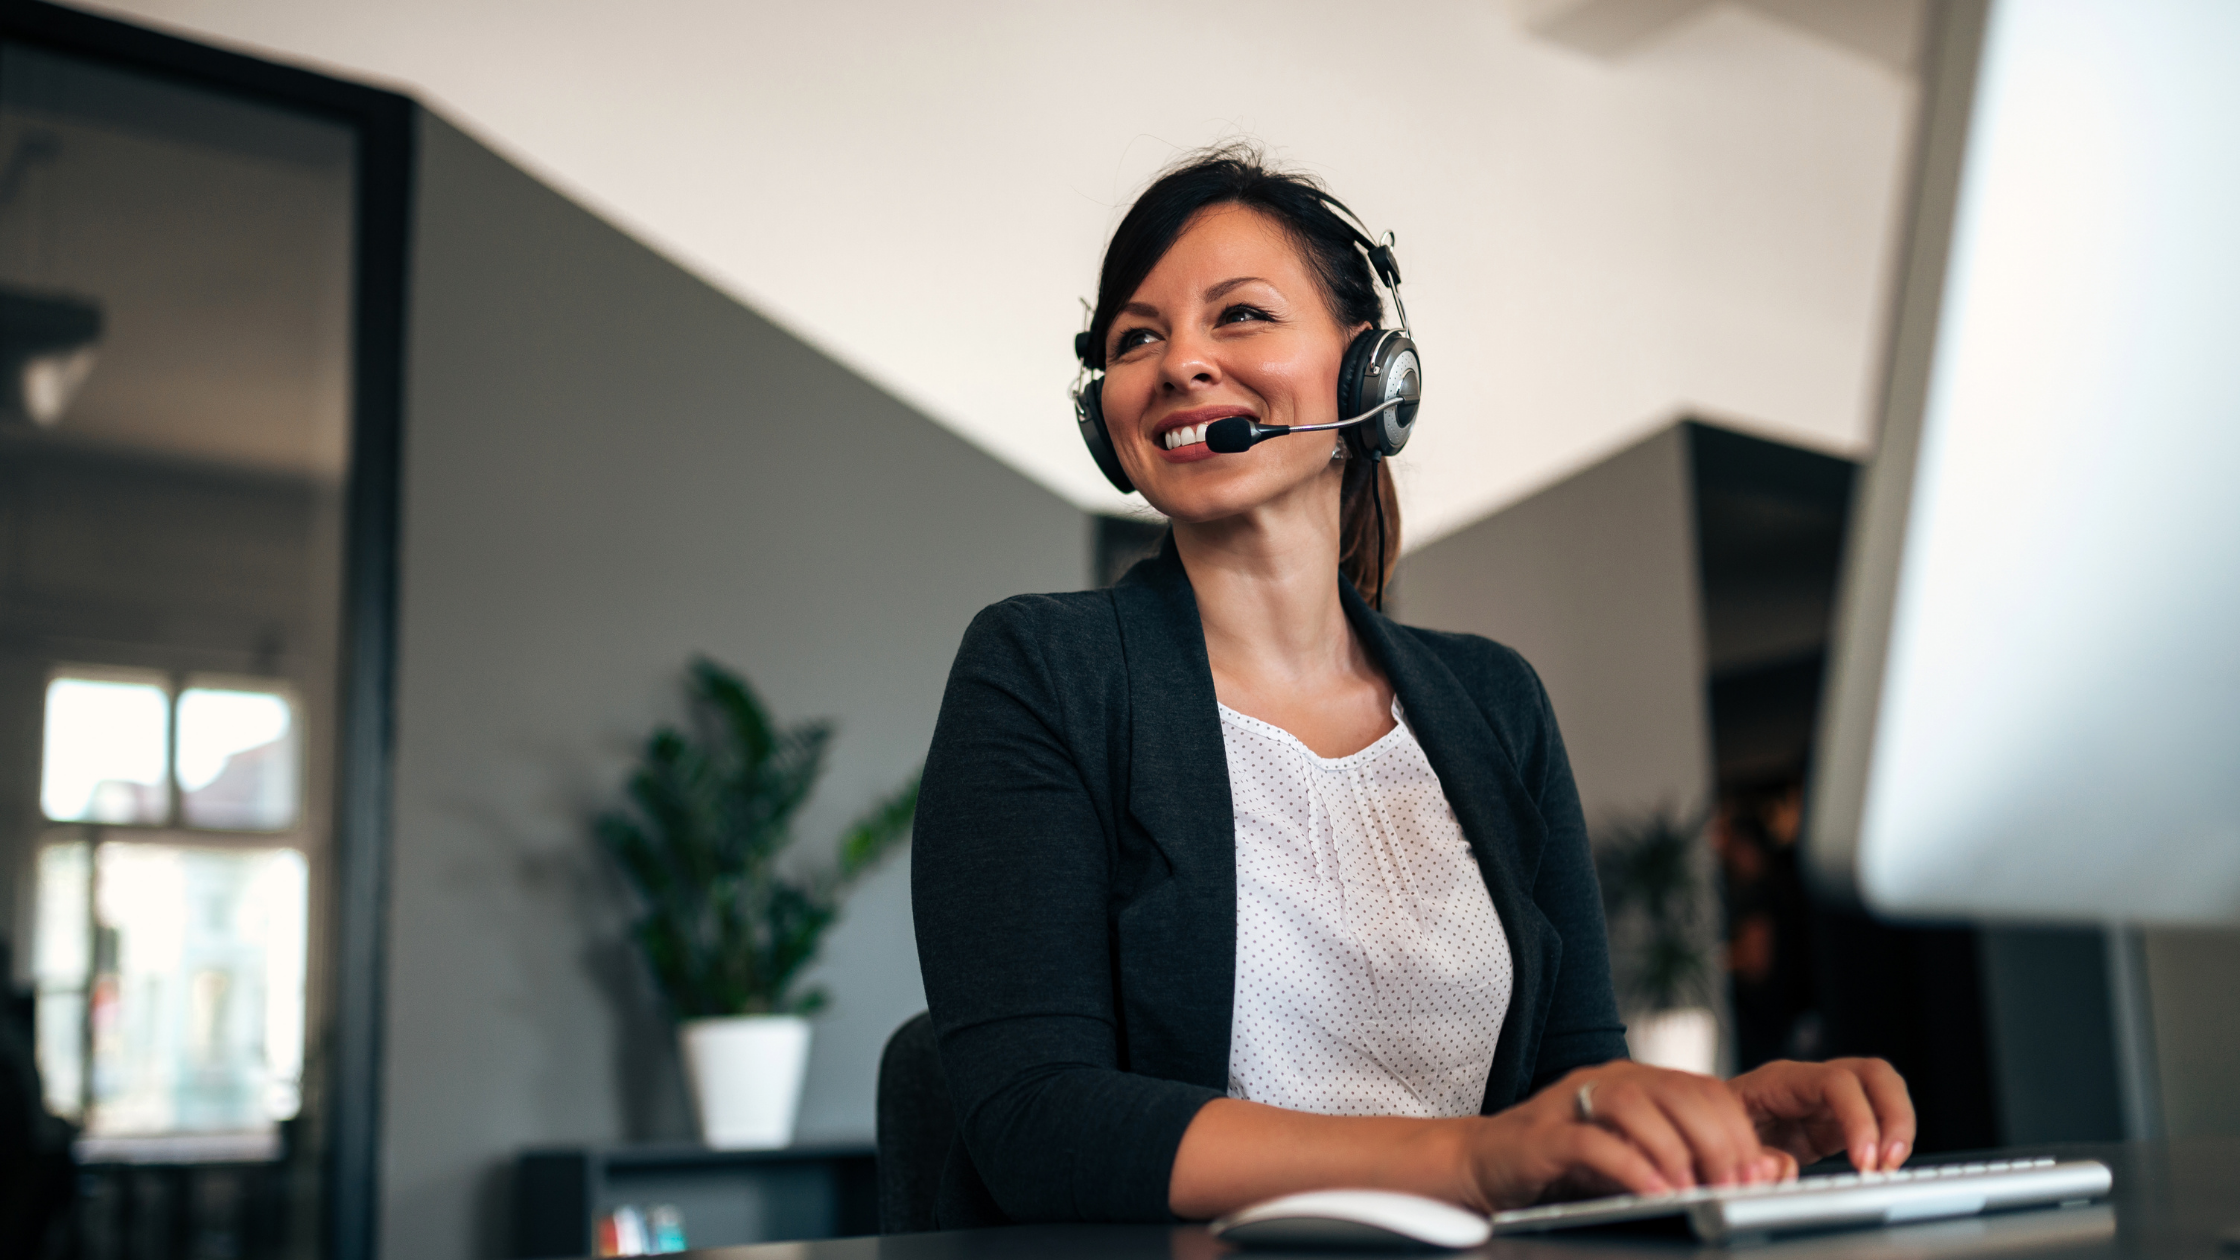 Bringing A Human Touch: Live Receptionist Answering Service Client Stories thumbnail